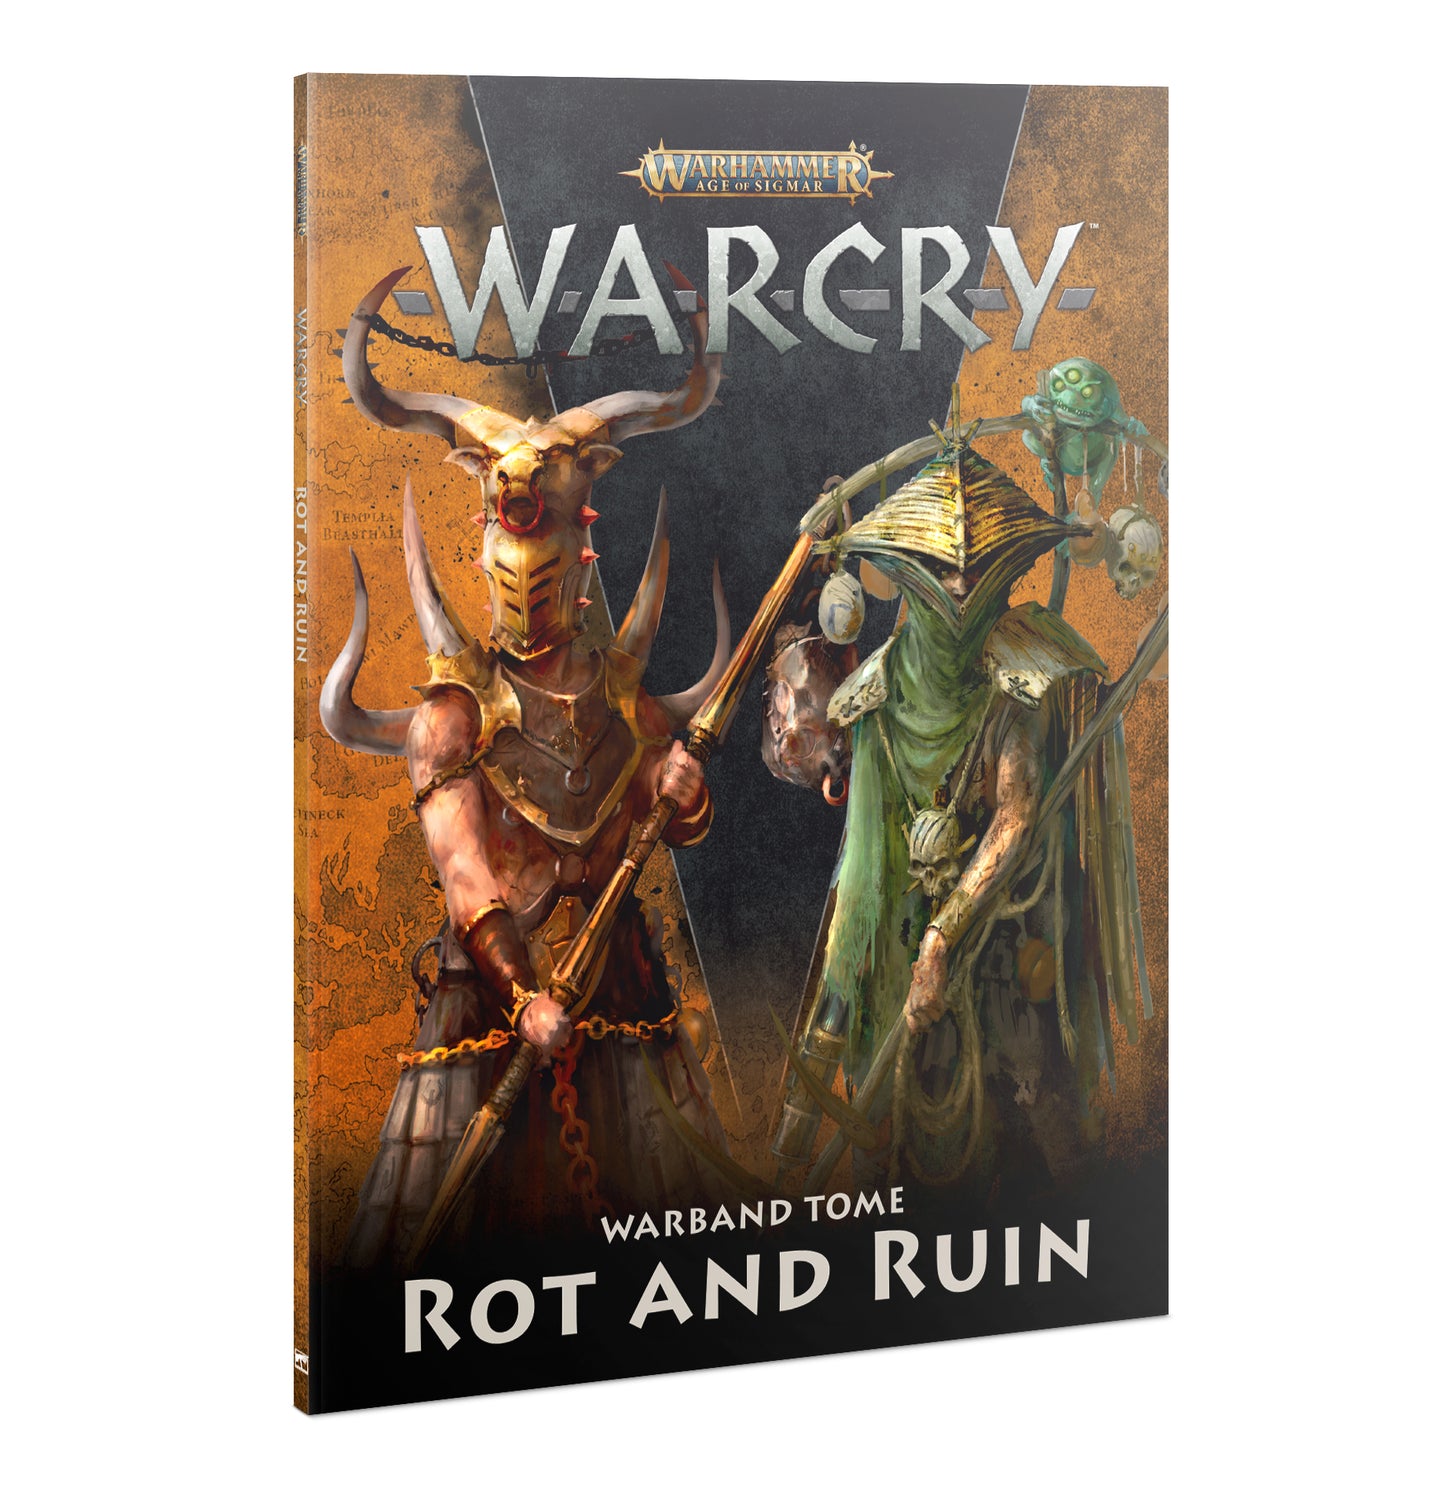 Warcry - Warband Tome, Rot and Ruin